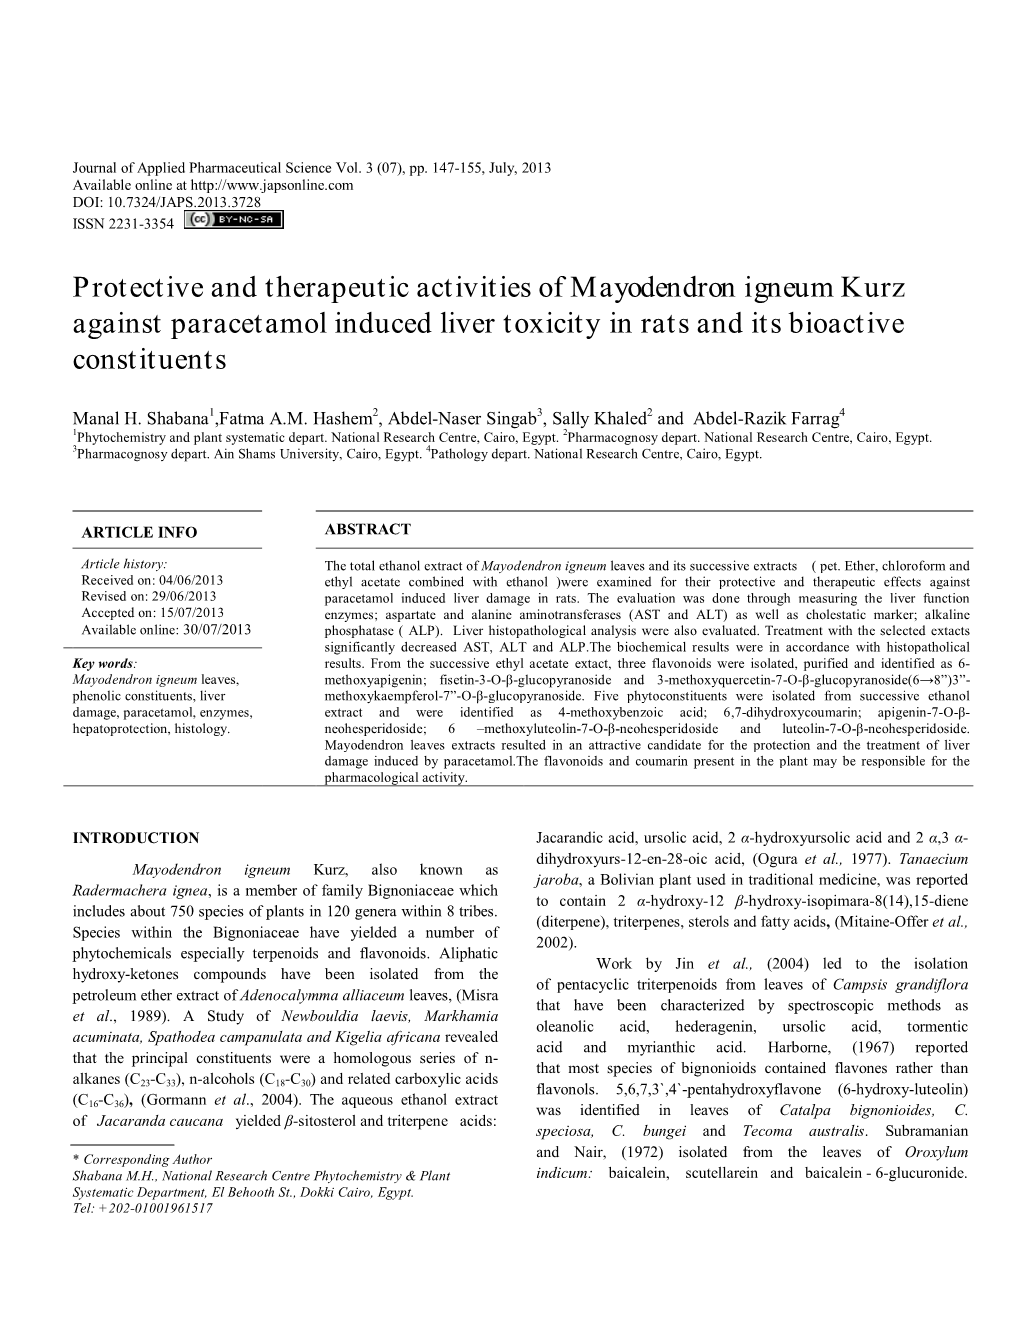 Protective and Therapeutic Activities of Mayodendron Igneum Kurz Against Paracetamol Induced Liver Toxicity in Rats and Its Bioactive Constituents